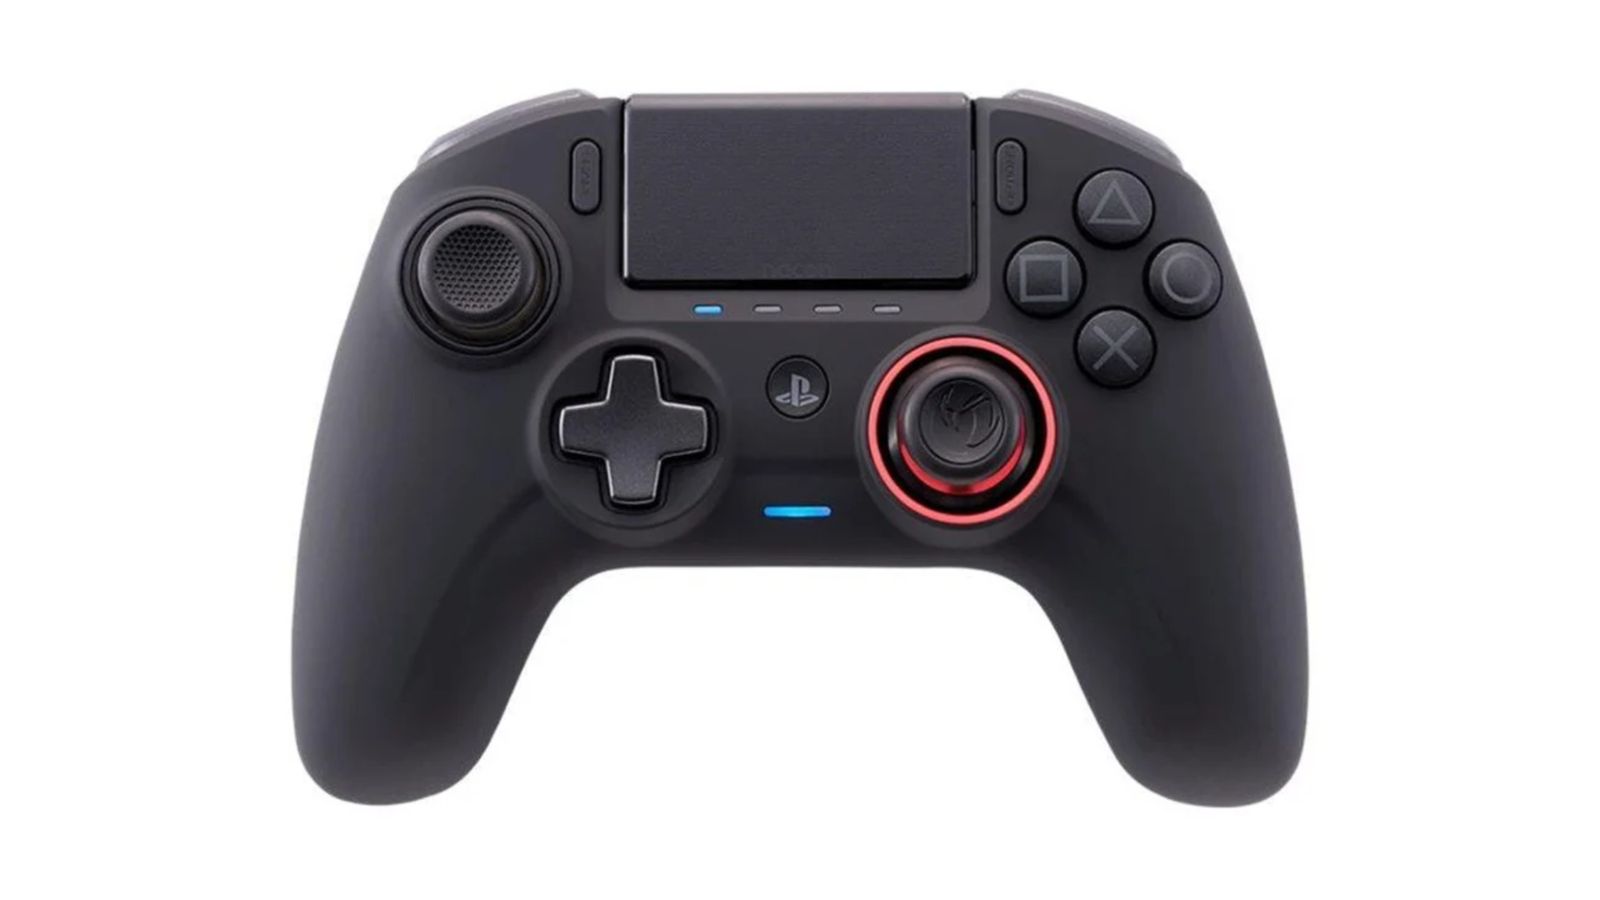 Nacon Revolution Unlimited Pro product image of a black gamepad with a red light ring around the right thumb stick.